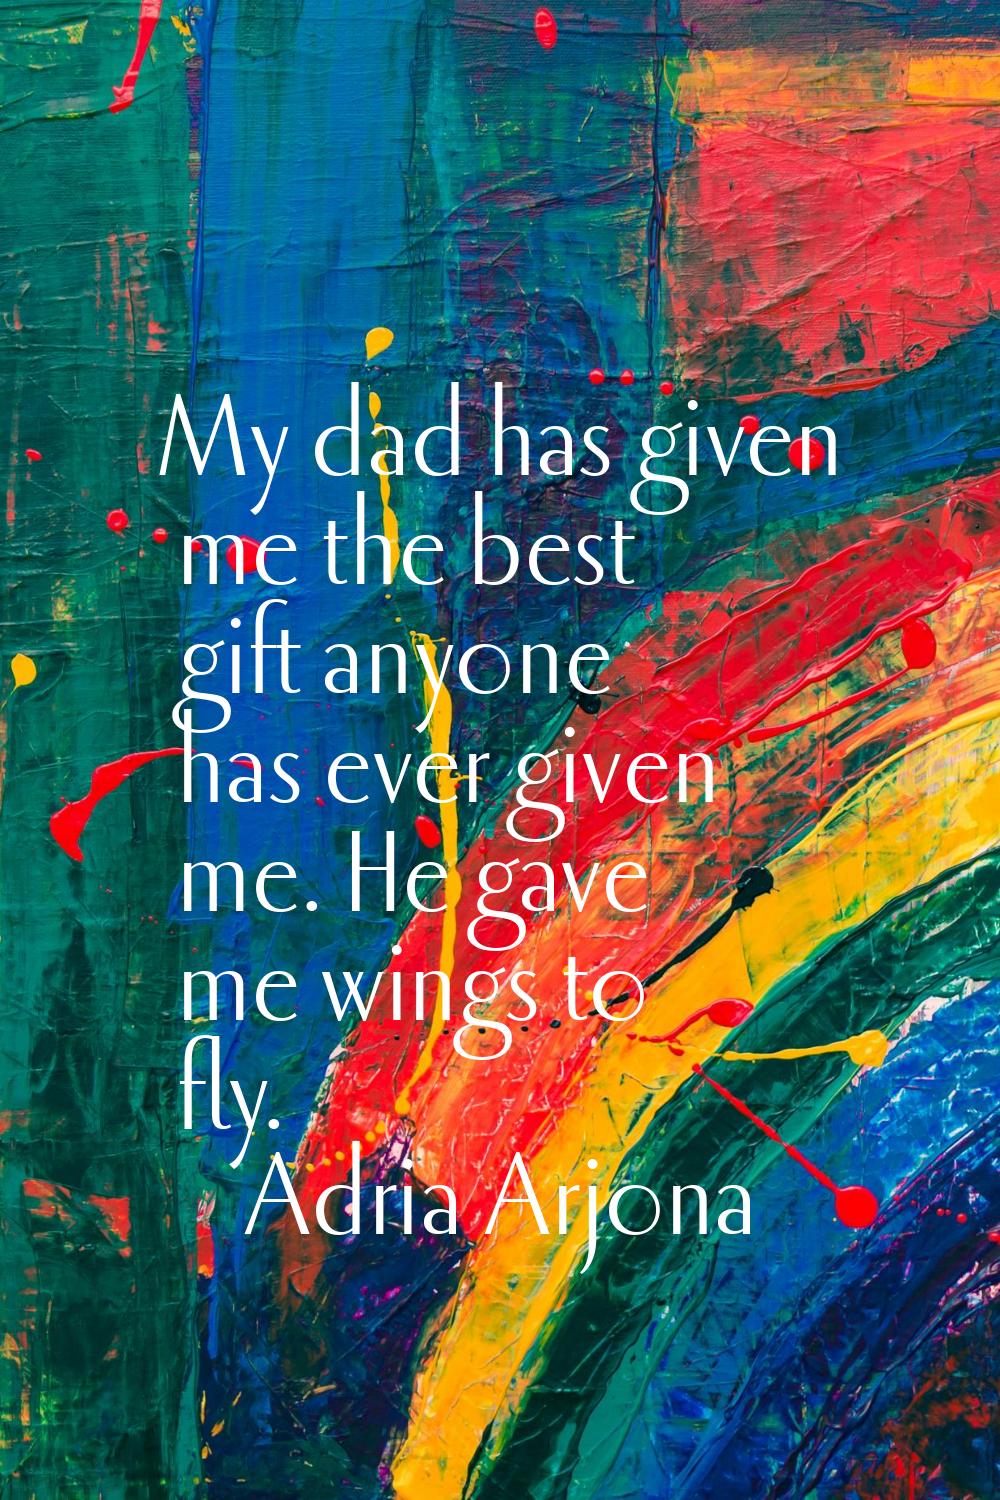 My dad has given me the best gift anyone has ever given me. He gave me wings to fly.